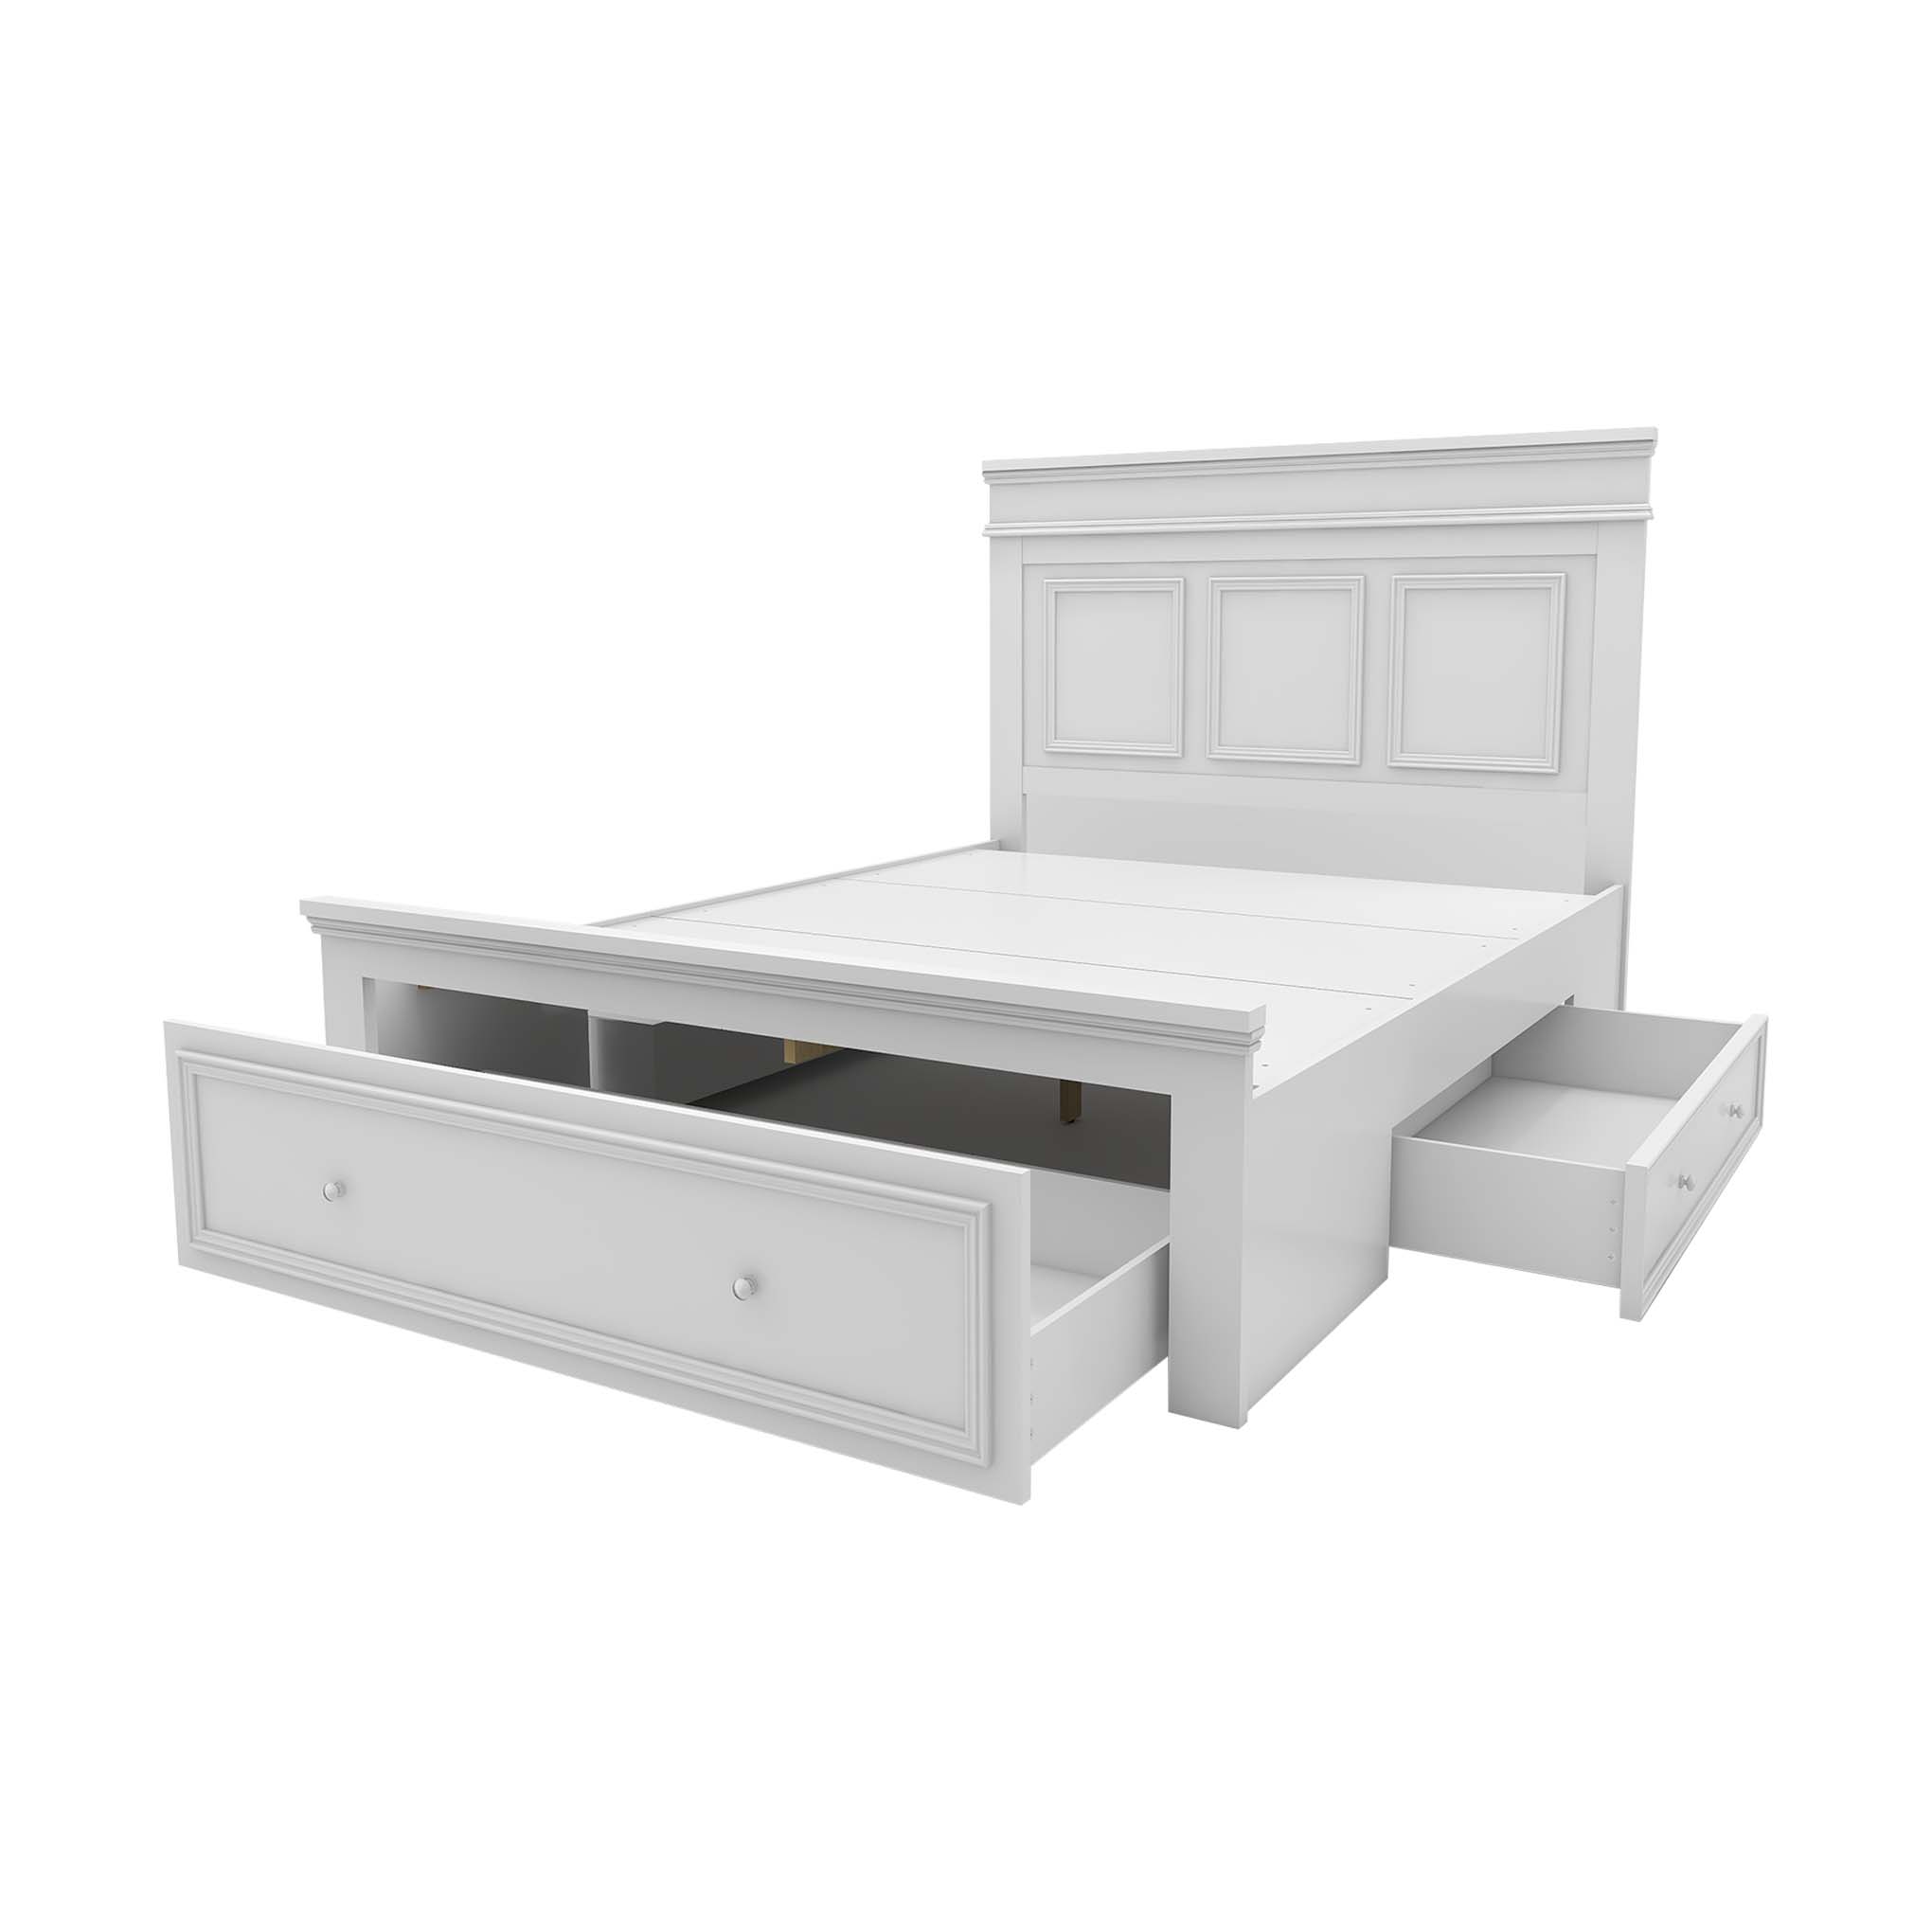 <b>Charlotte King/Queen Bed</b><br>King : L2133 X W1957 X H1364 MM<br>Queen : L2133 X W1652 X H1364 MM